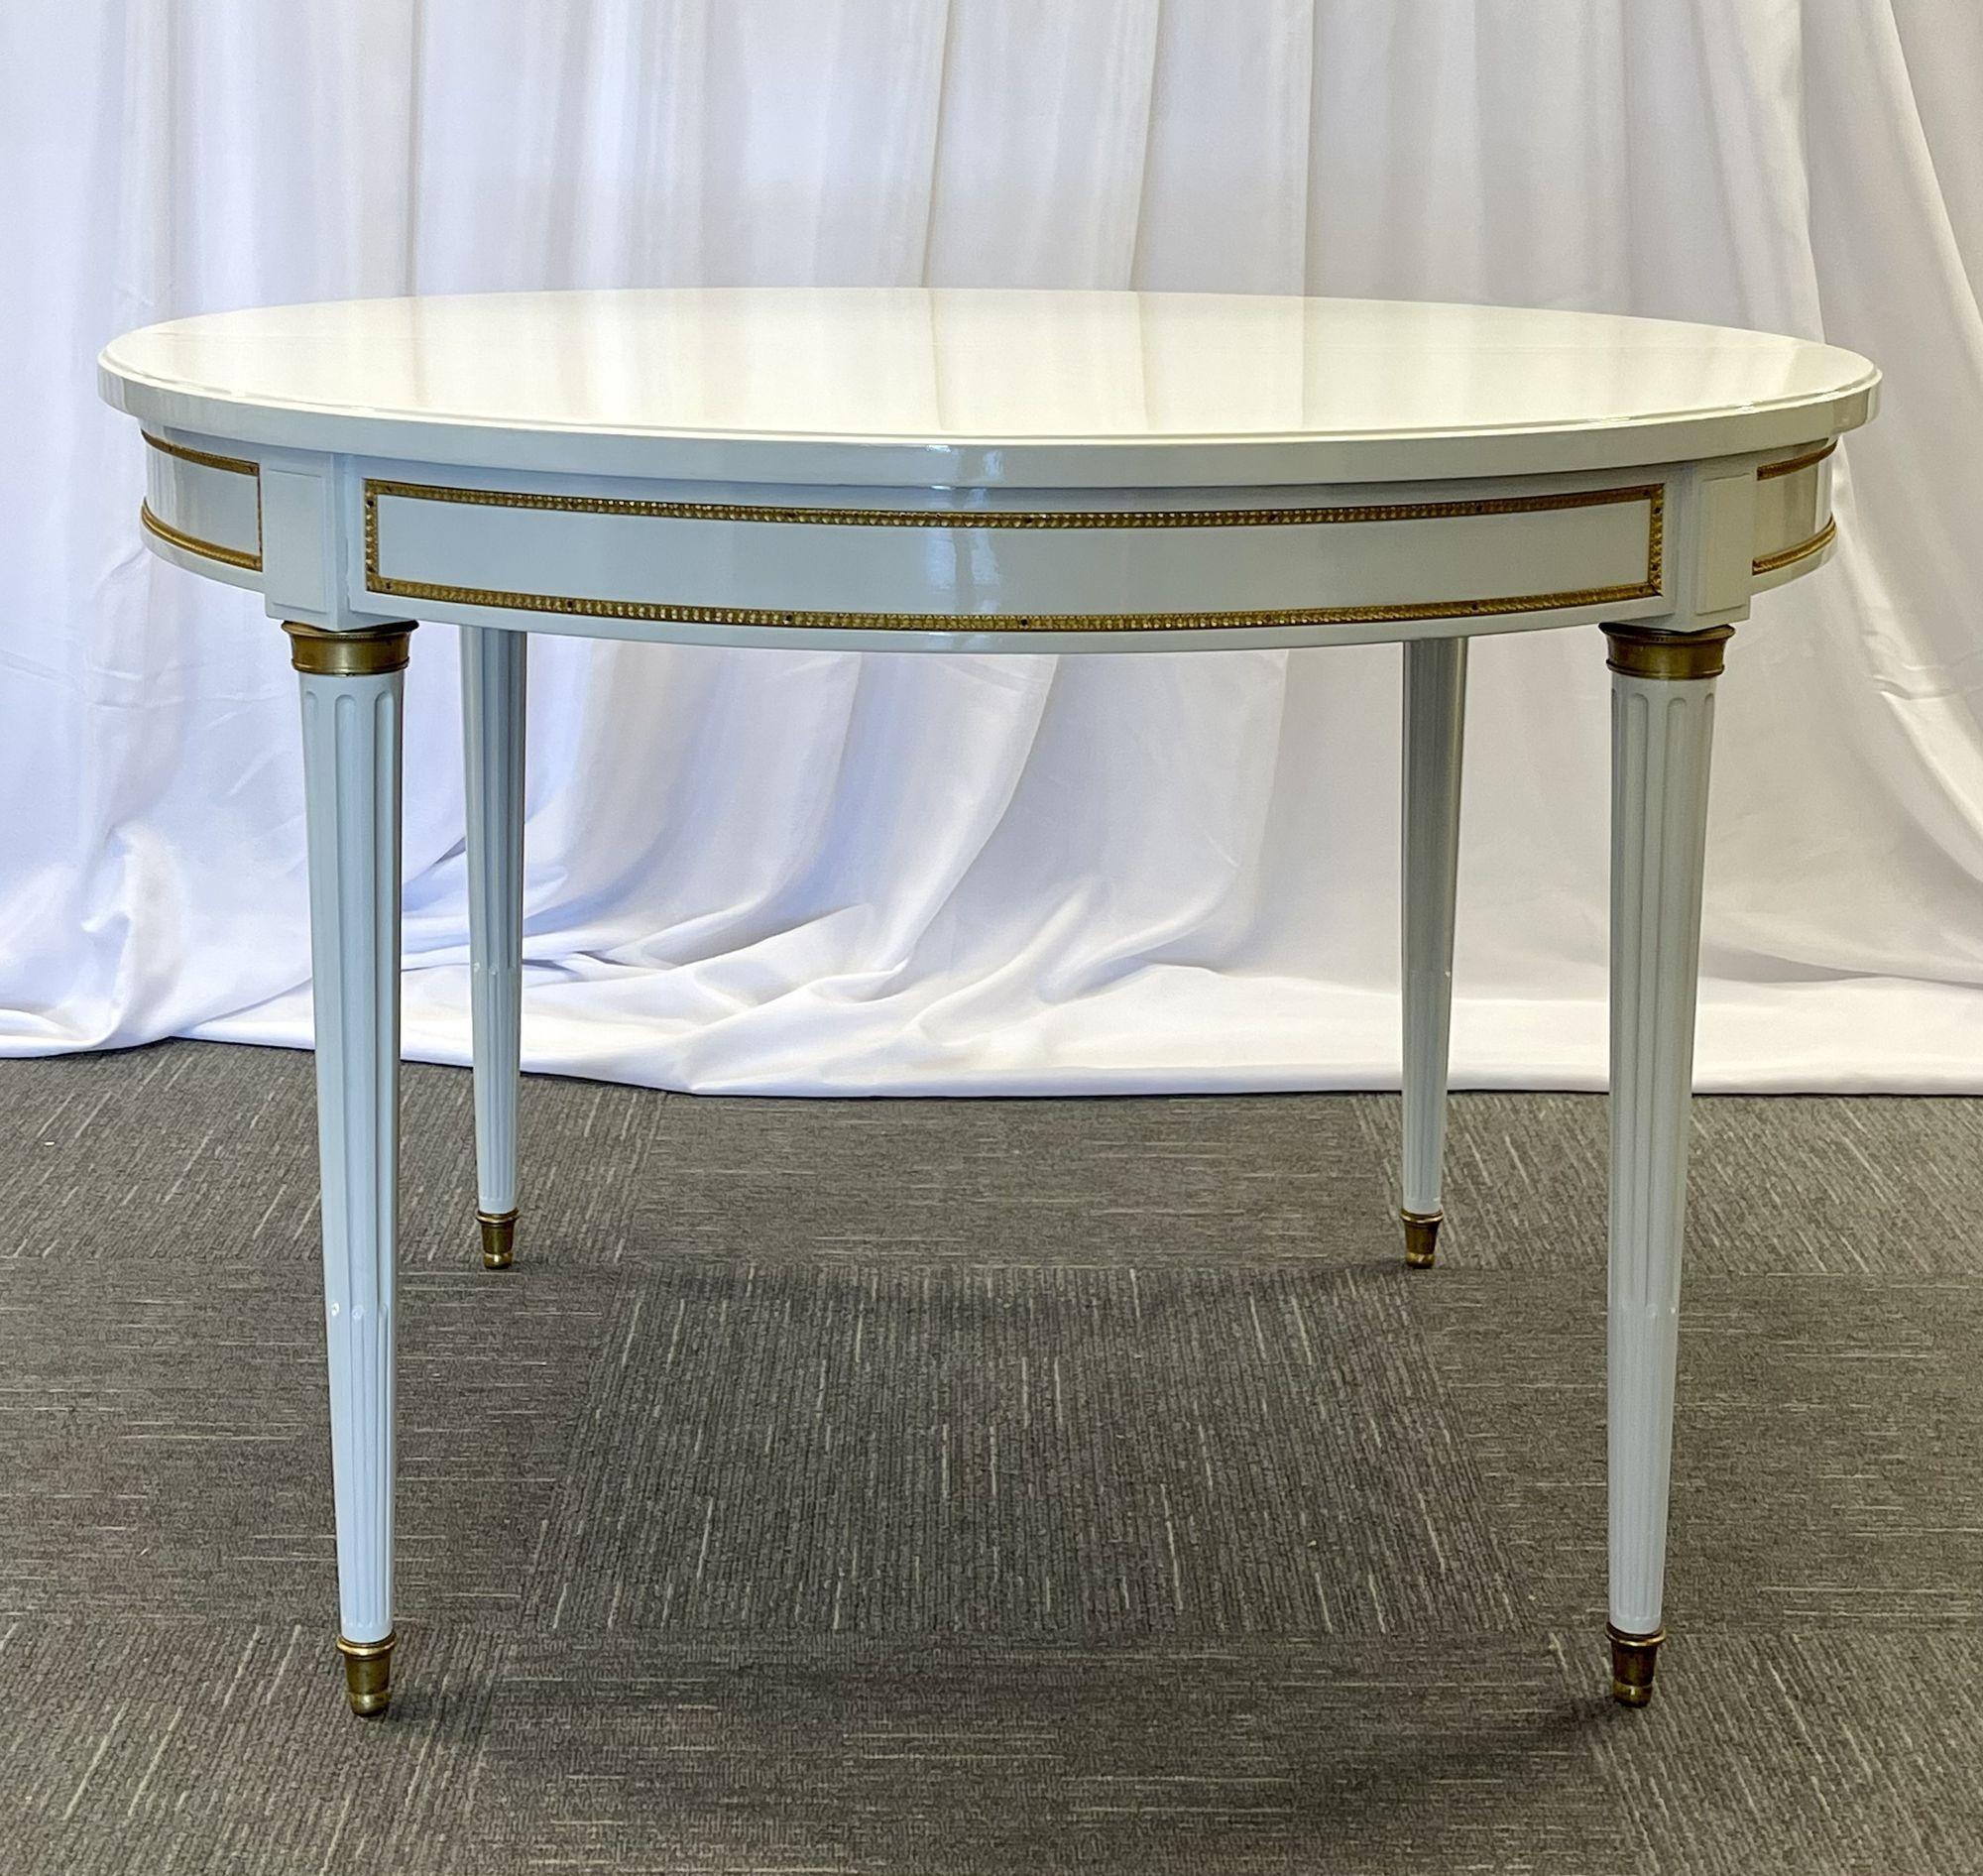 Hollywood Regency Louis XVI Style Dining Table, White Lacquer, Bronze, Jansen Style. Part of our extensive collection of over forty dining tables and chair sets as seen on this site, thus why we are referred to as the King of Dining rooms.
Fully